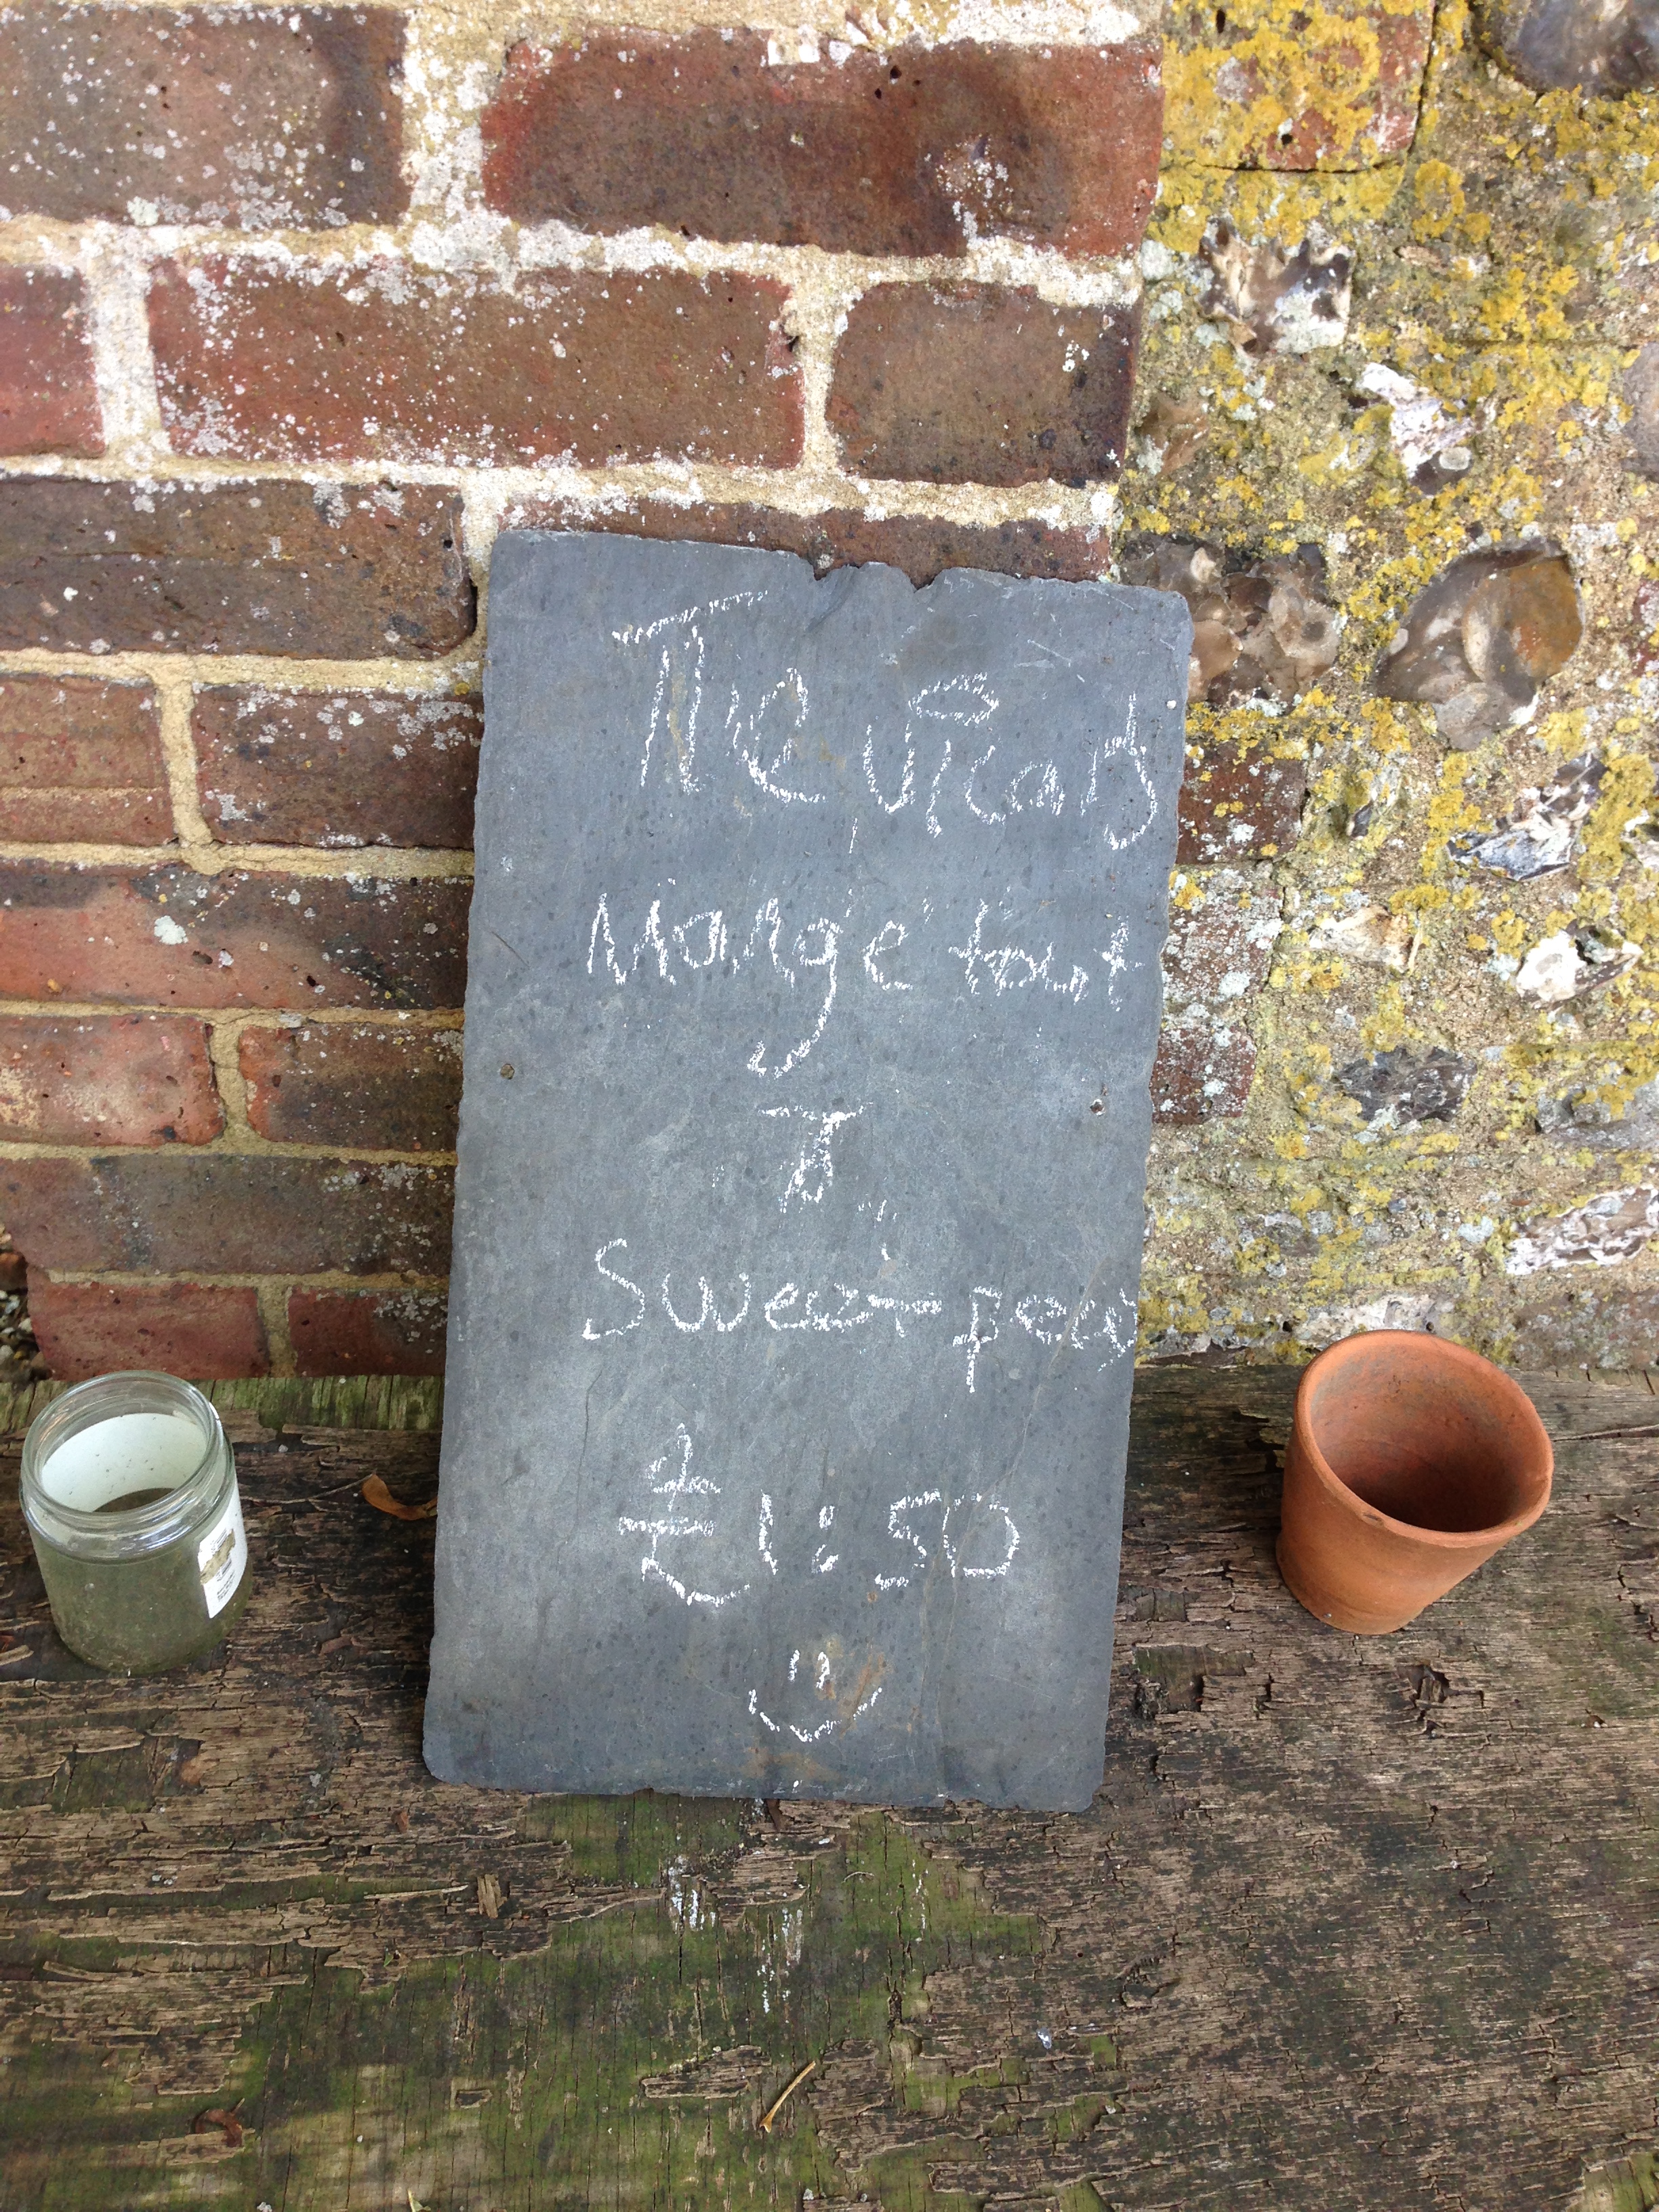  We were disappointed that the vicar's mangetout and sweet peas had all been sold! 